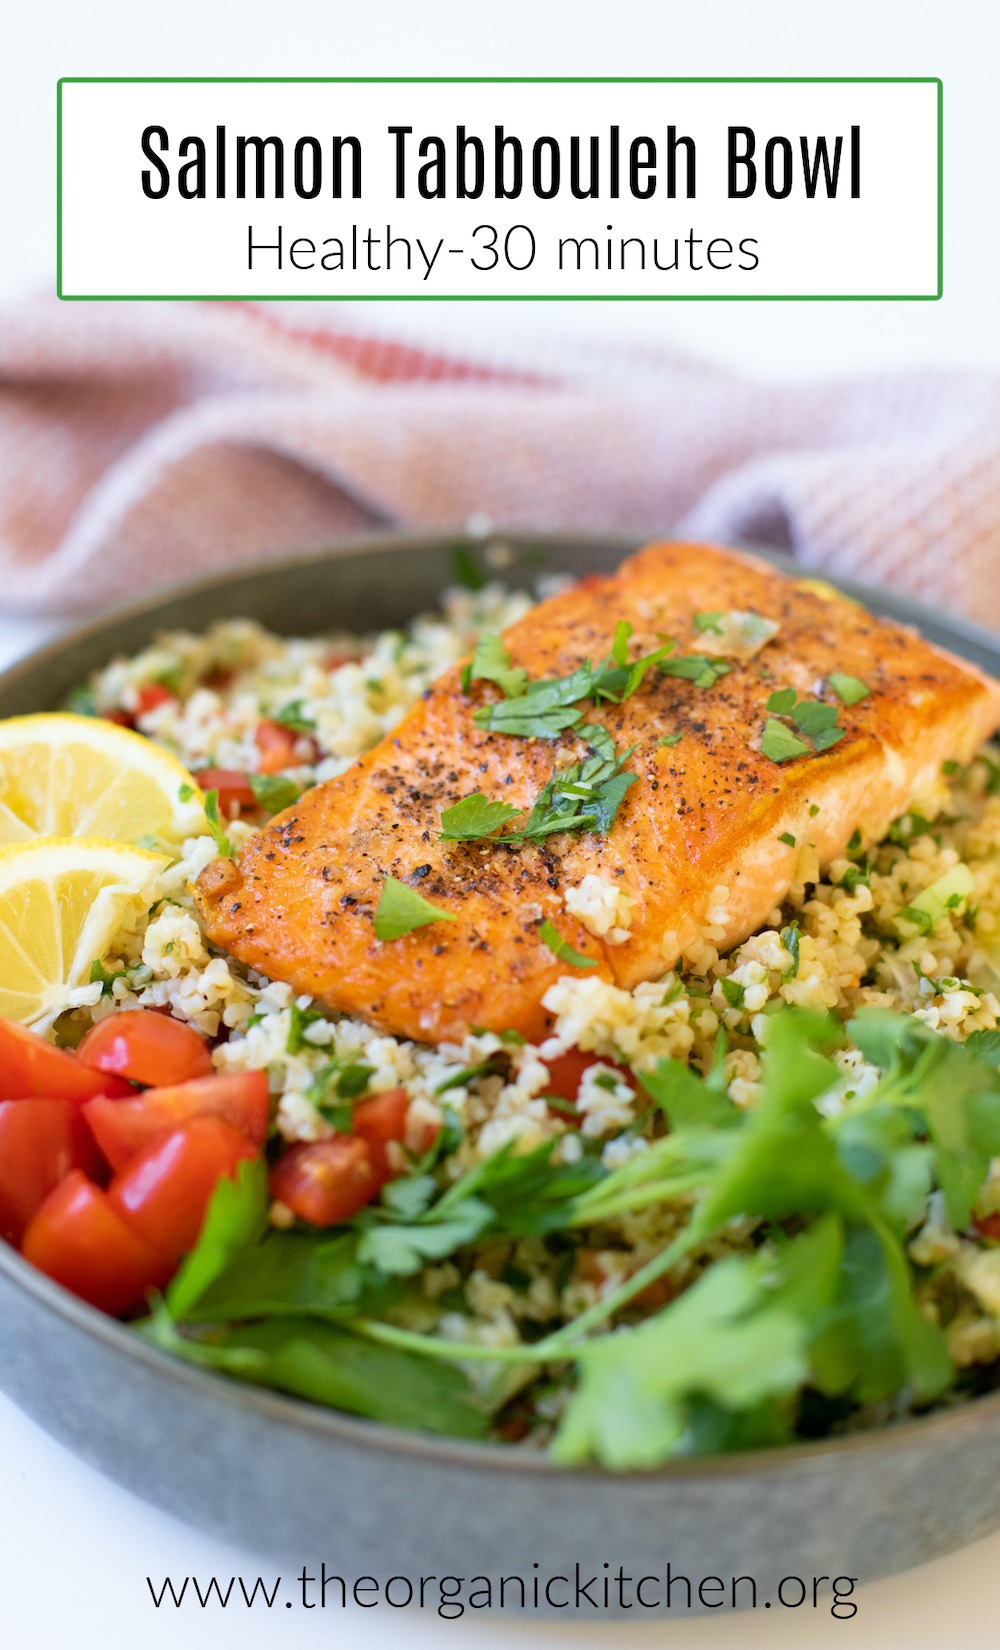 A colorful Salmon Tabbouleh Bowl in grey dish, surrounded by lemon wedges, parsley, and sliced tomatoes